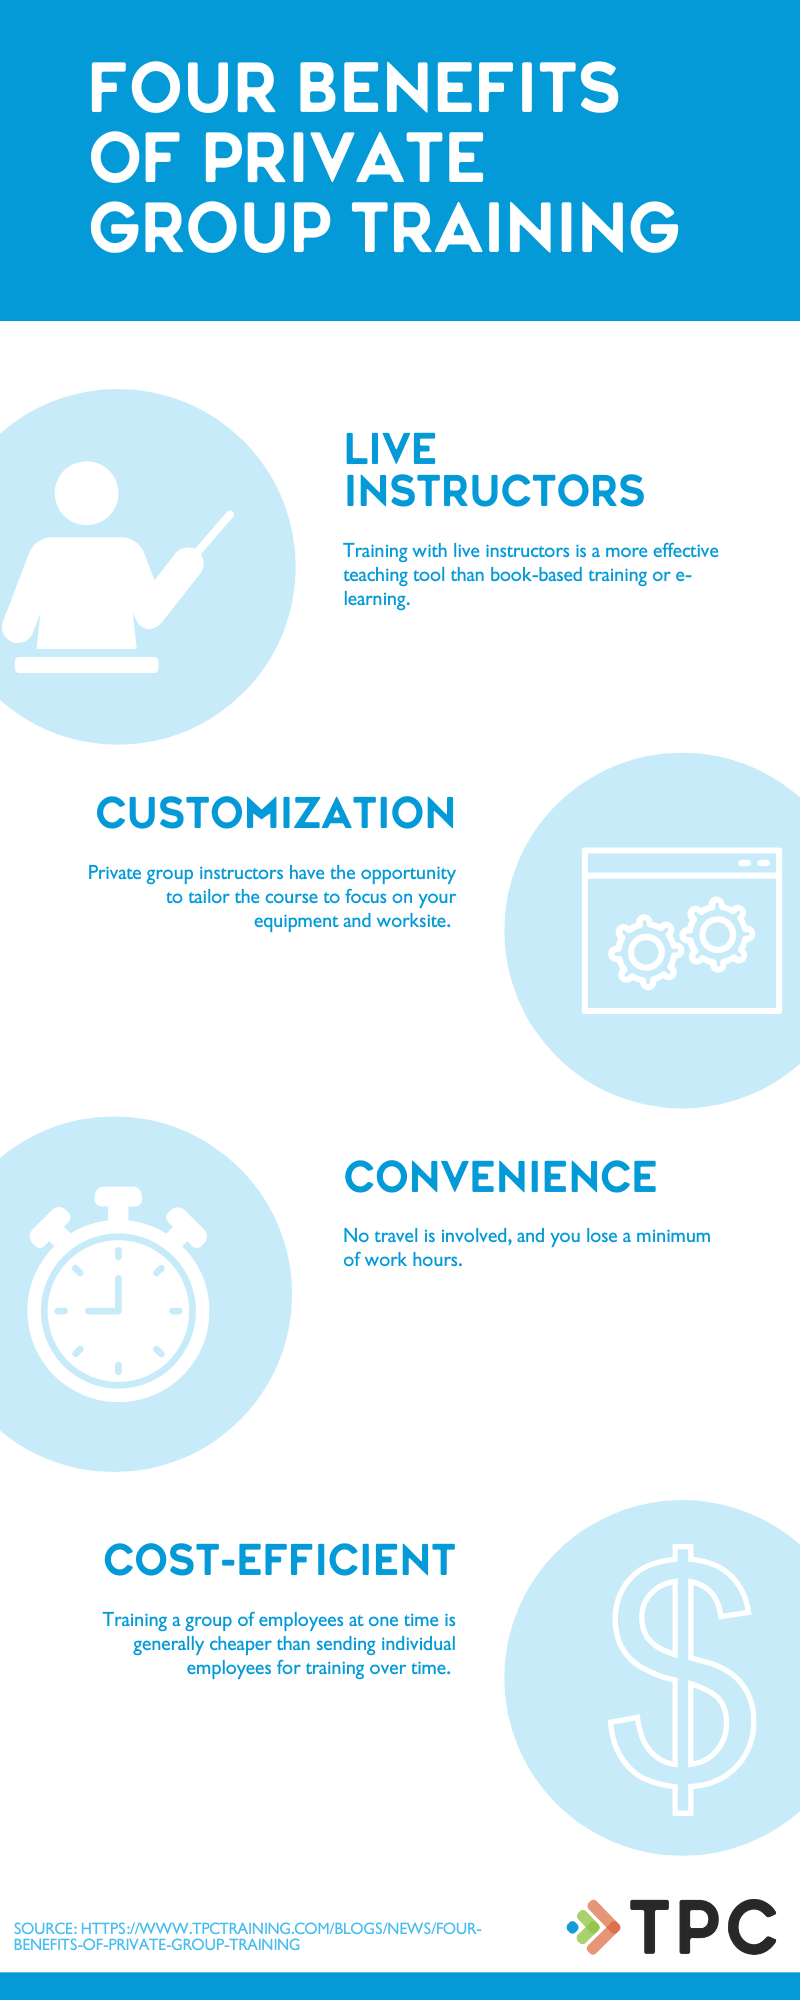 Four benefits of private group training infographic - live instructors, customization, convenience, and cost-efficient